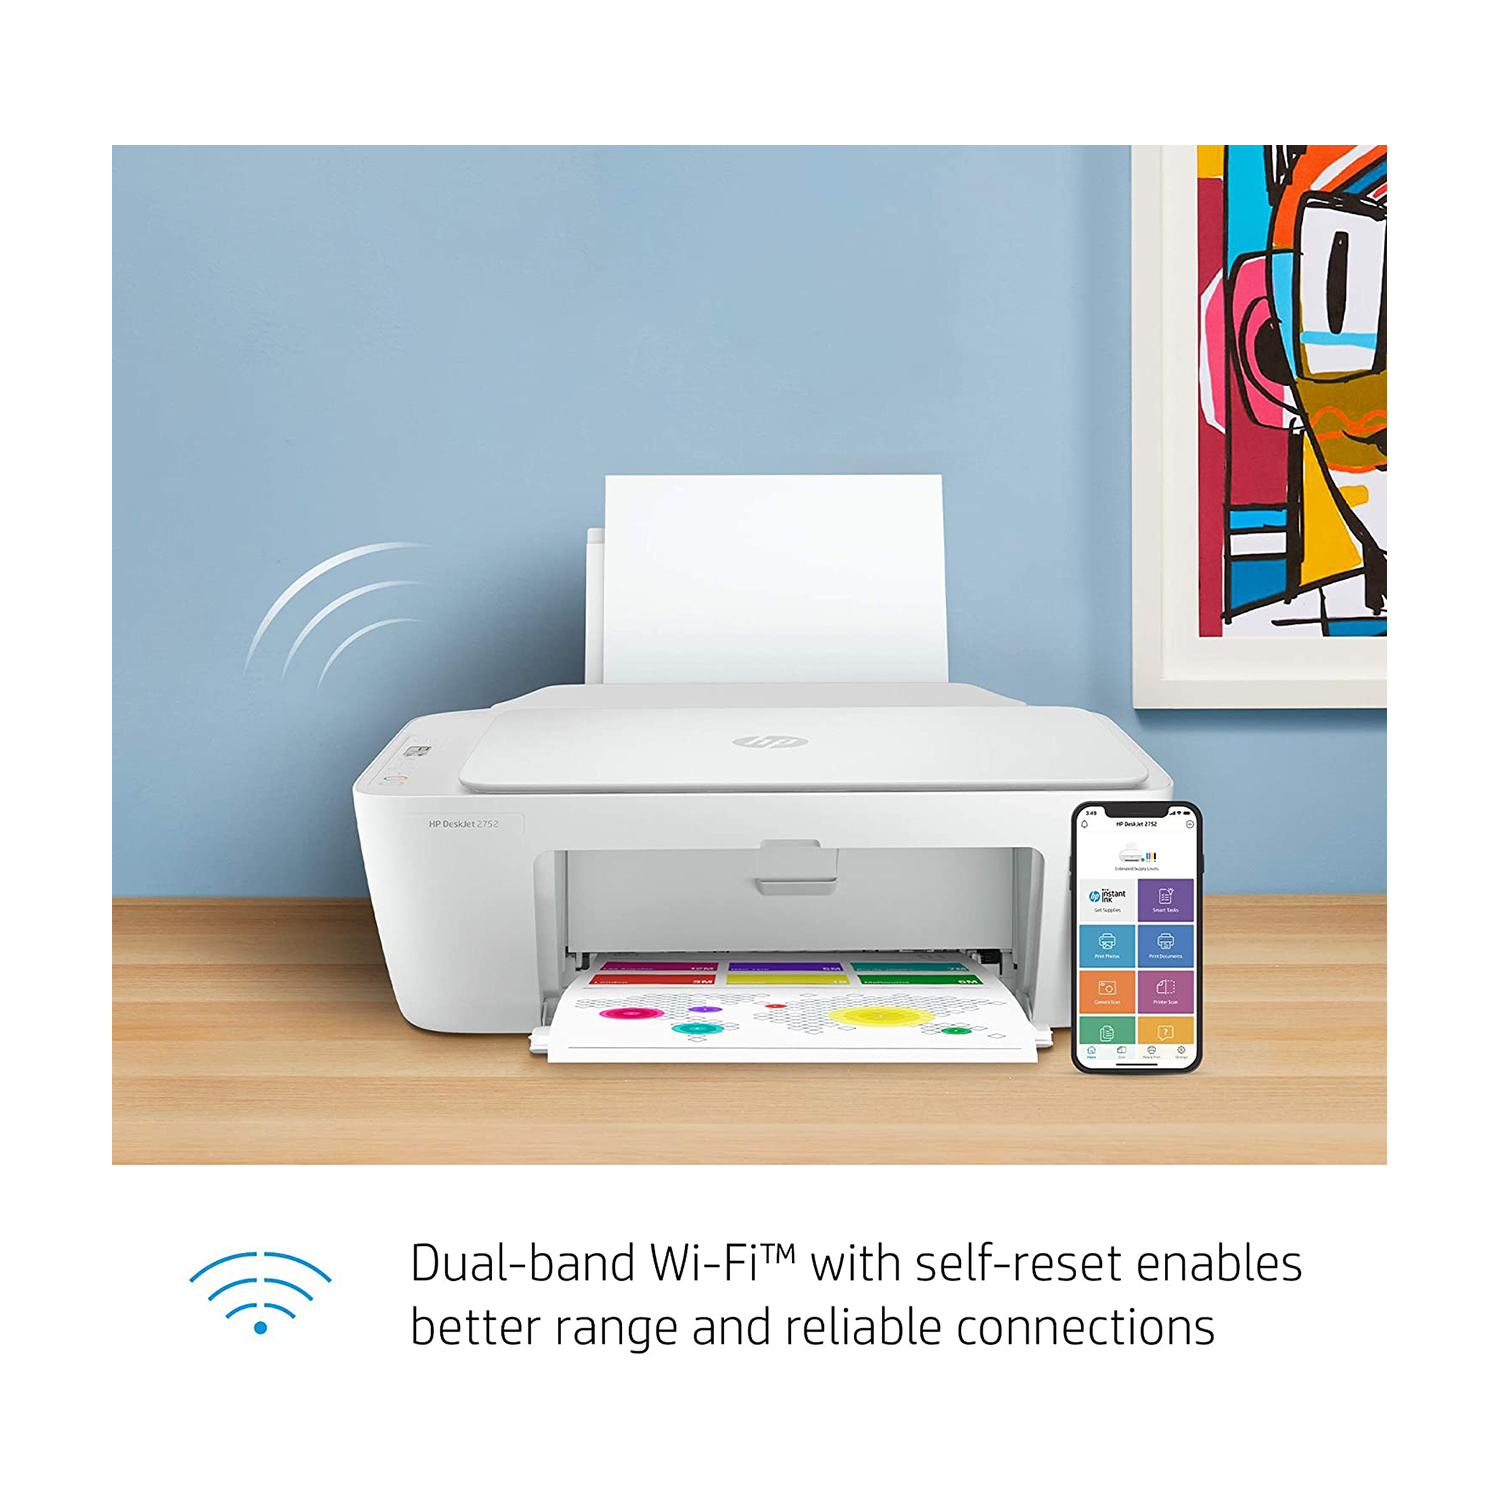 HP DeskJet Series Wireless All-in-One Color Inkjet Printer – Print, Scan,  Copy for Home Business Office – Icon LCD Display, Instant Ink Ready, Up to 1200  x 1200 dpi, Bluetooth 4.1, WiFi, USB – Everestonline